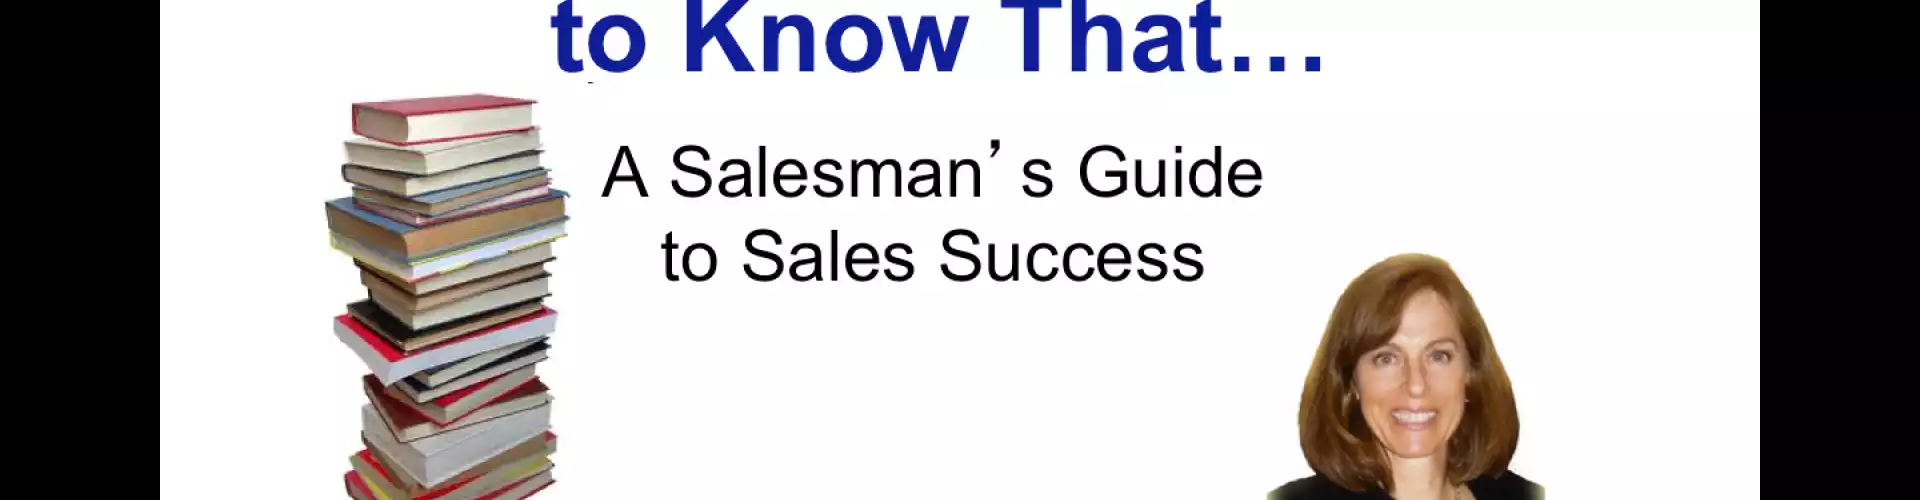 Would Have Liked to Know That!: A Salesman's Guide To Sales Success 